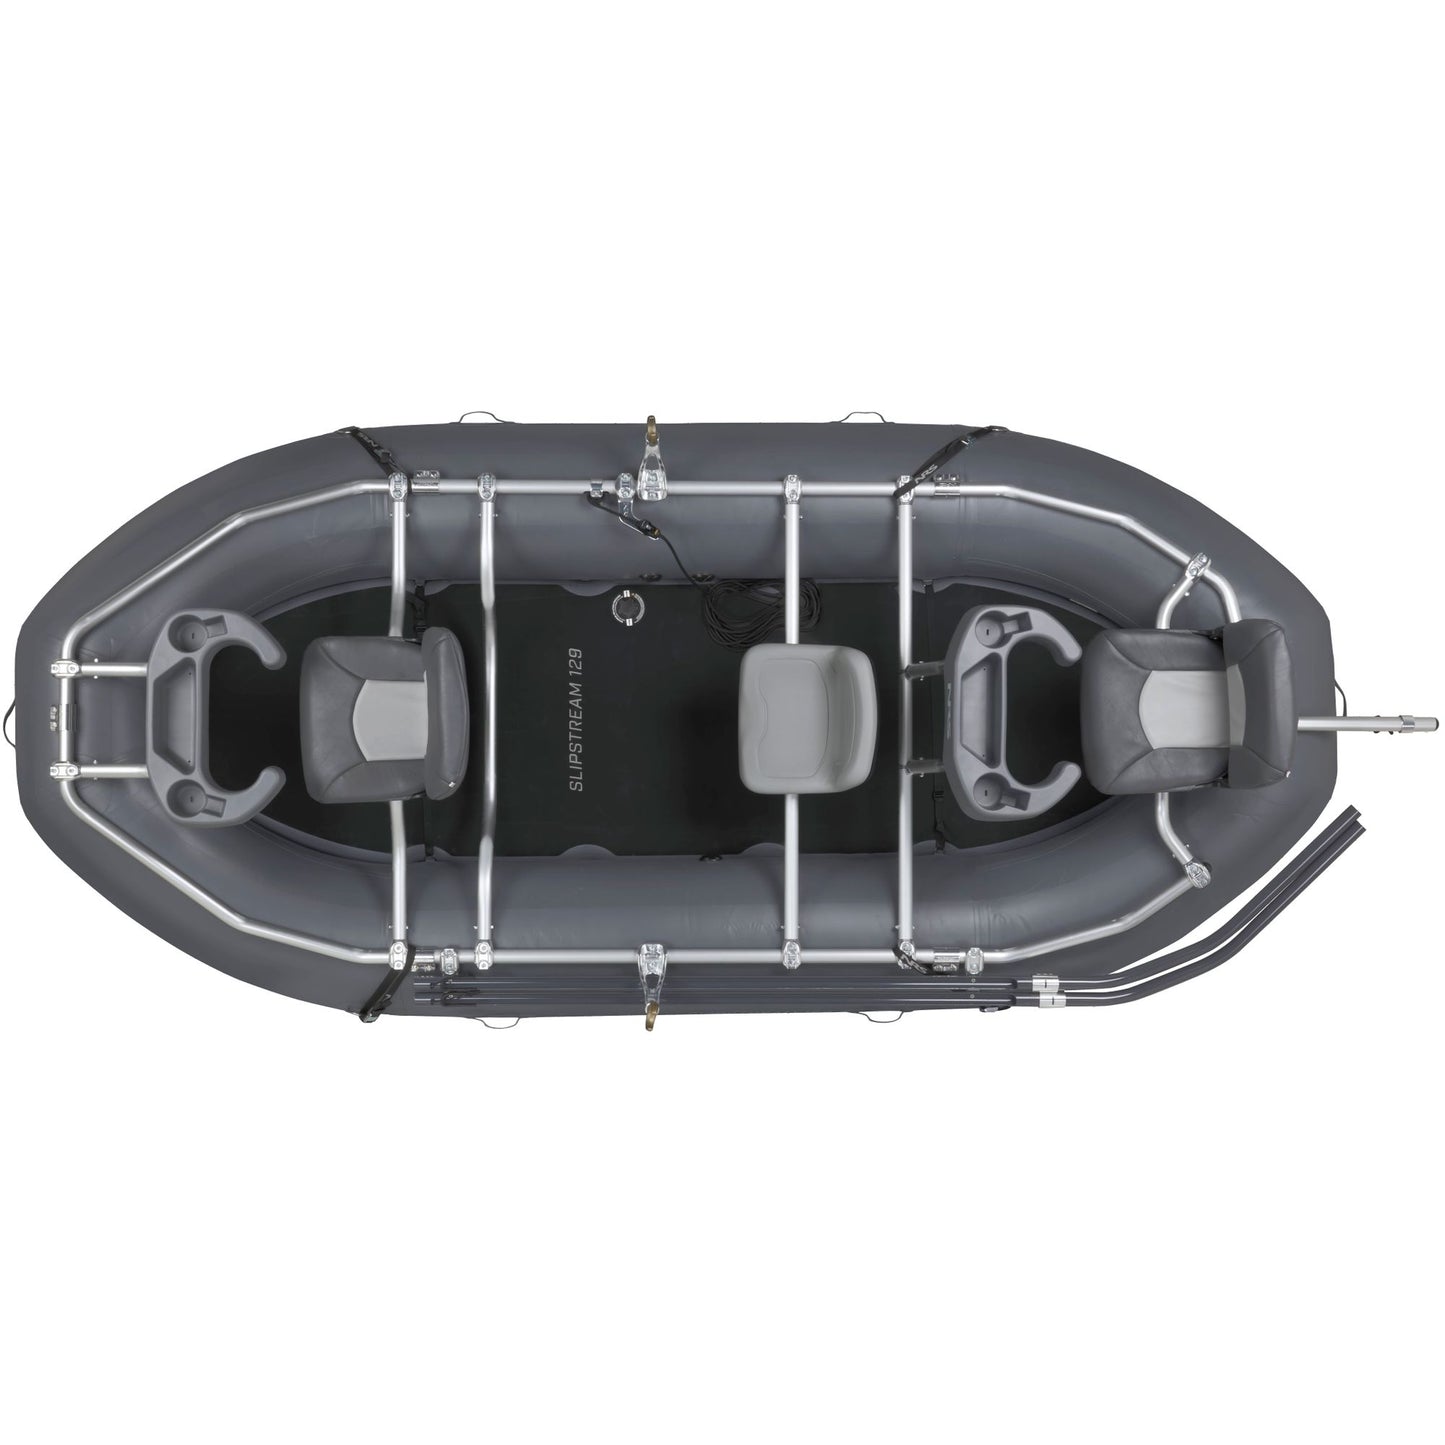 A gray NRS Slipstream Fishing Raft with three seats and a slip-resistant foam pad.